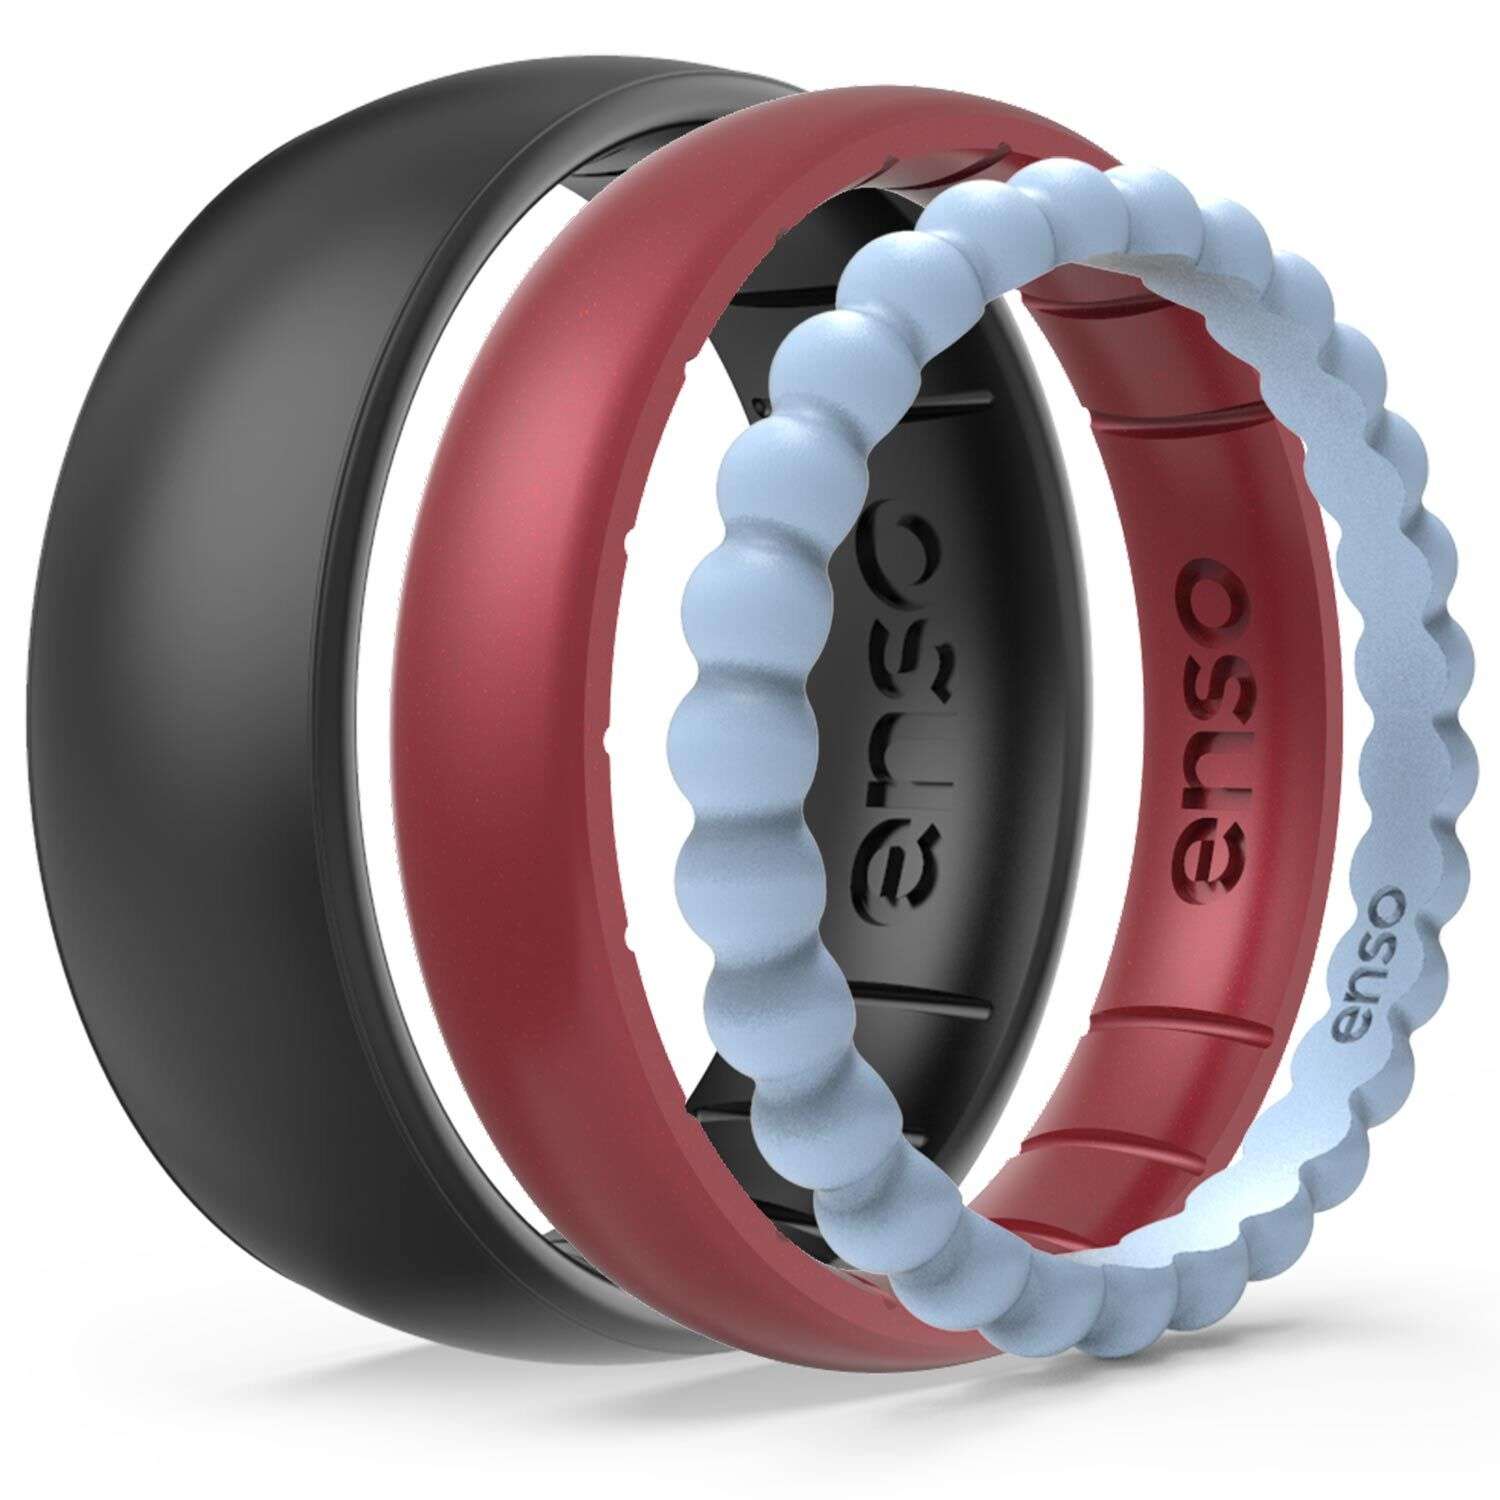 Enso Rings - Comfortable, stylish, and budget-friendly. 😍 These silicone  rings are made to adapt to any lifestyle without sacrificing any style.  Choose from a variety of designs and colors in women's